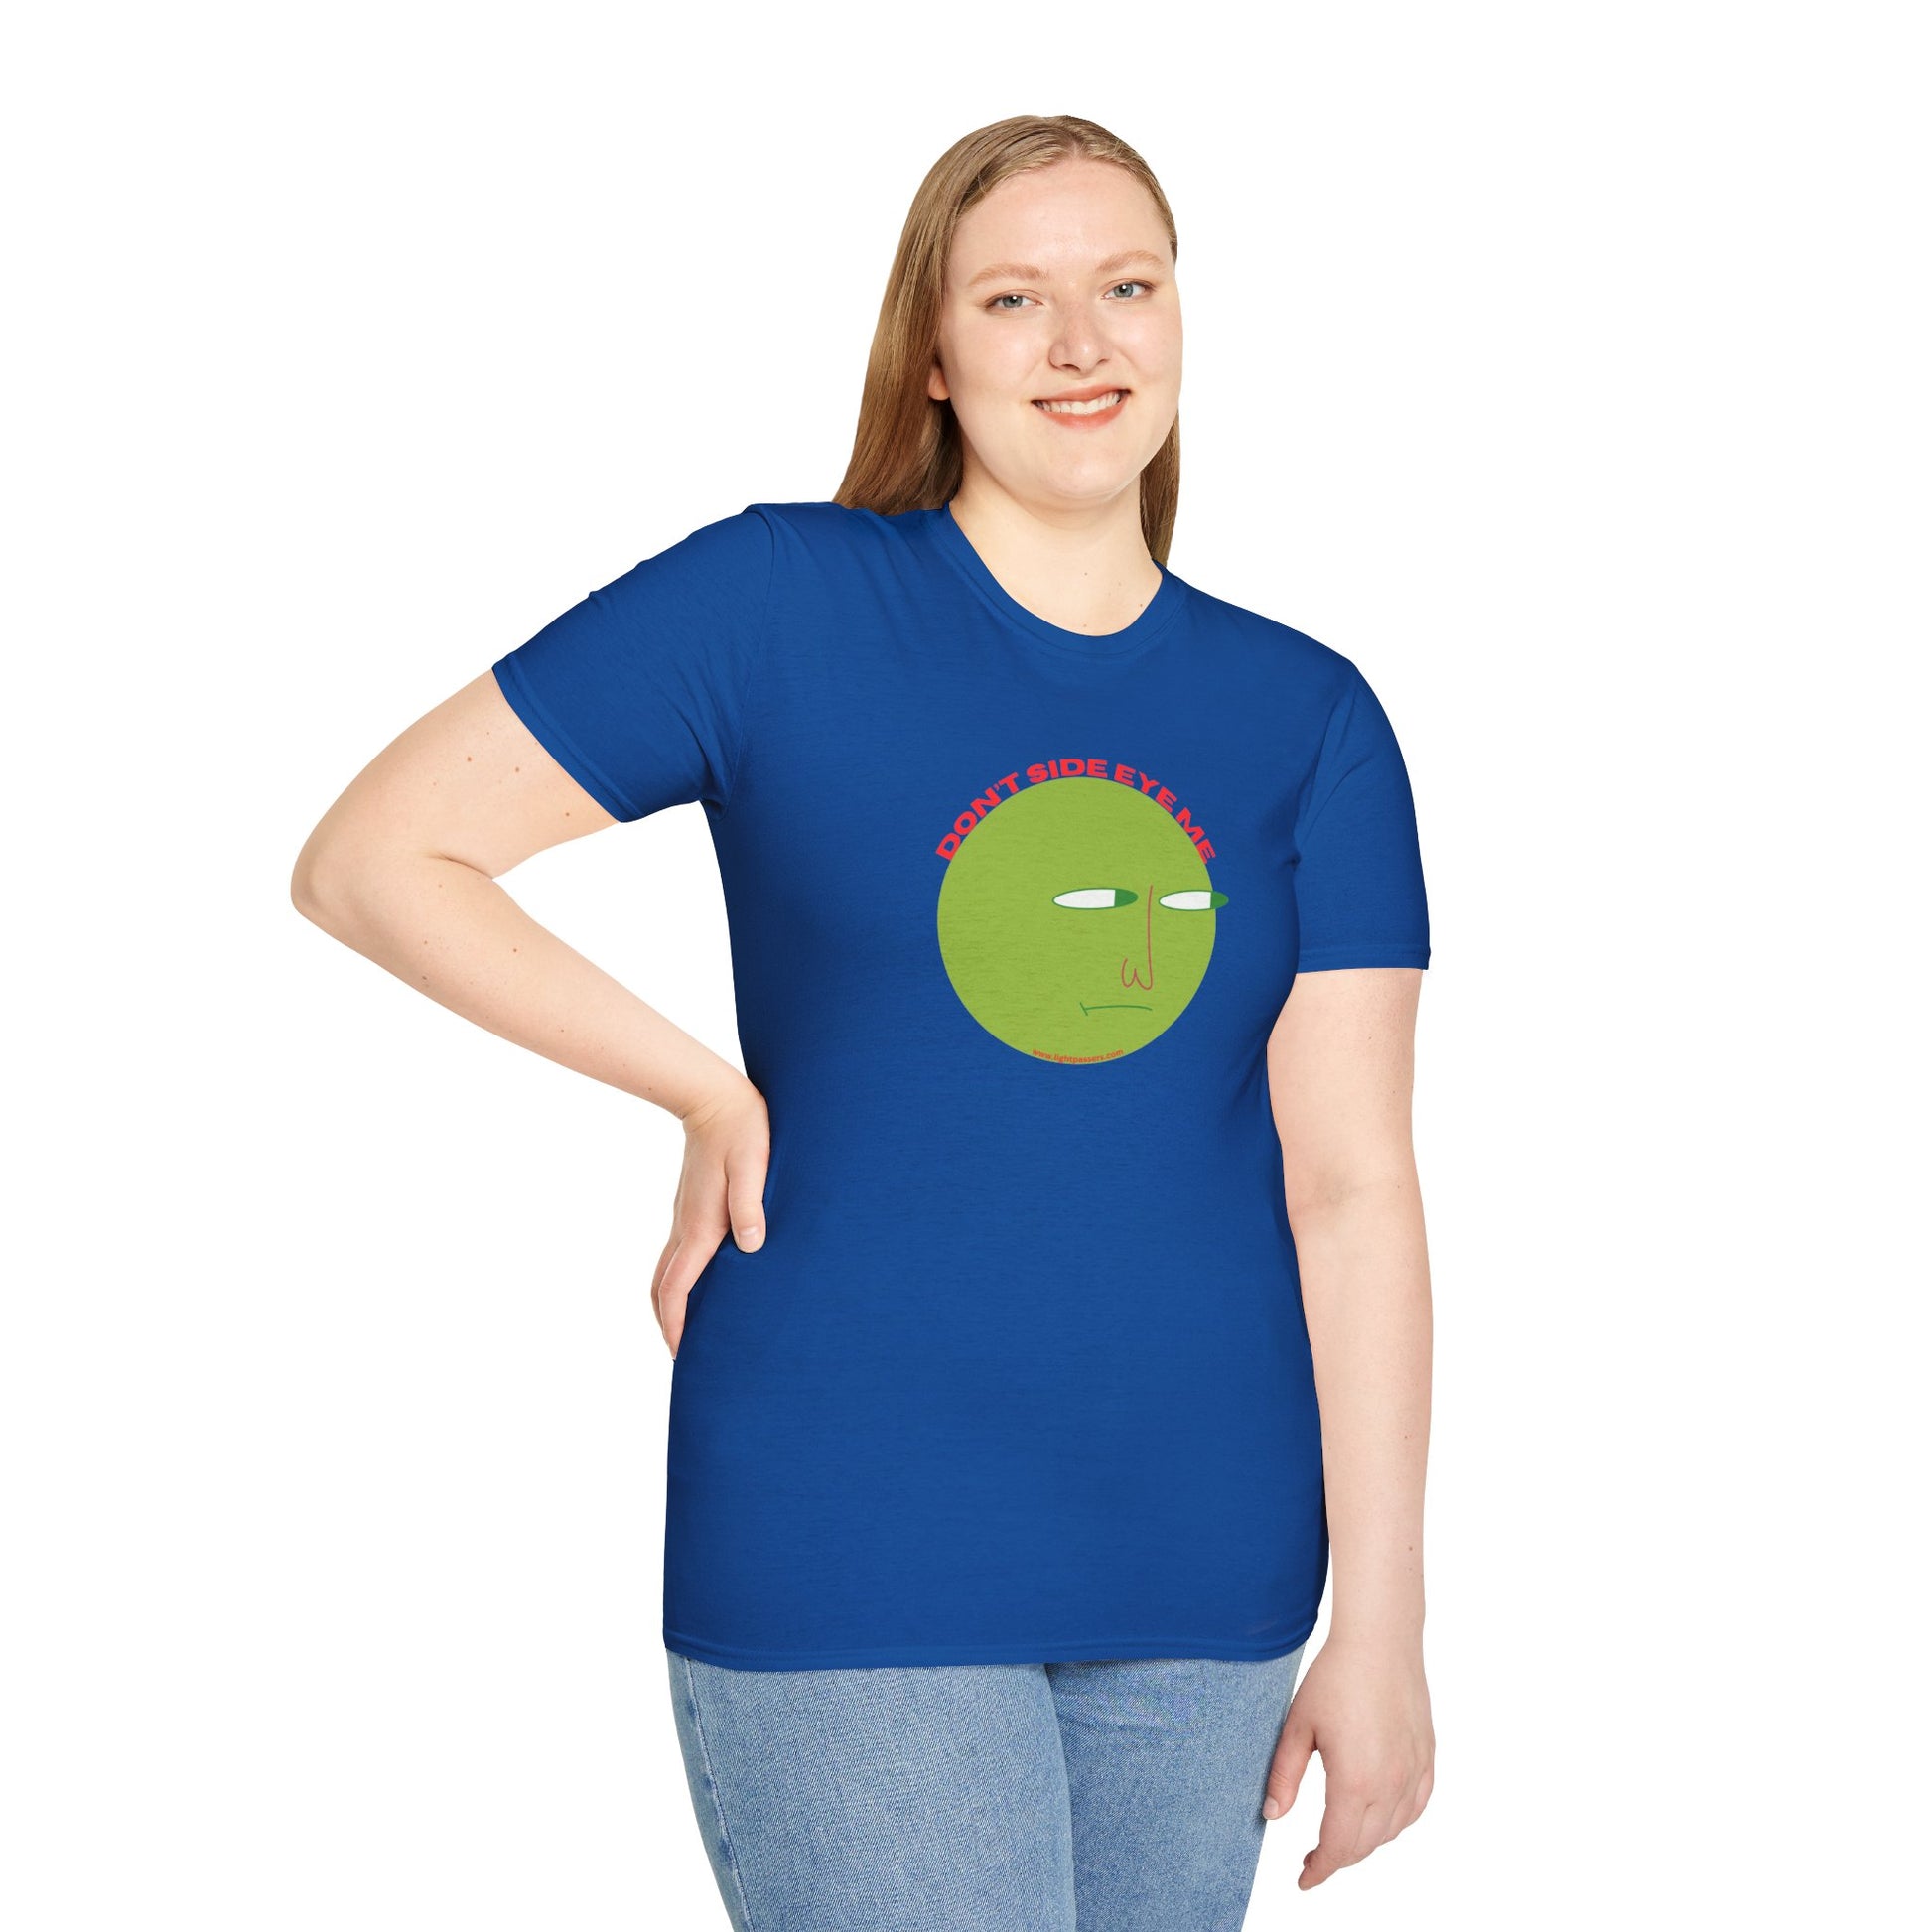 A woman in a blue shirt smiles, showcasing the Don't Side Eye Me unisex t-shirt. Made of soft 100% cotton, featuring twill tape shoulders and a ribbed collar for durability and comfort.